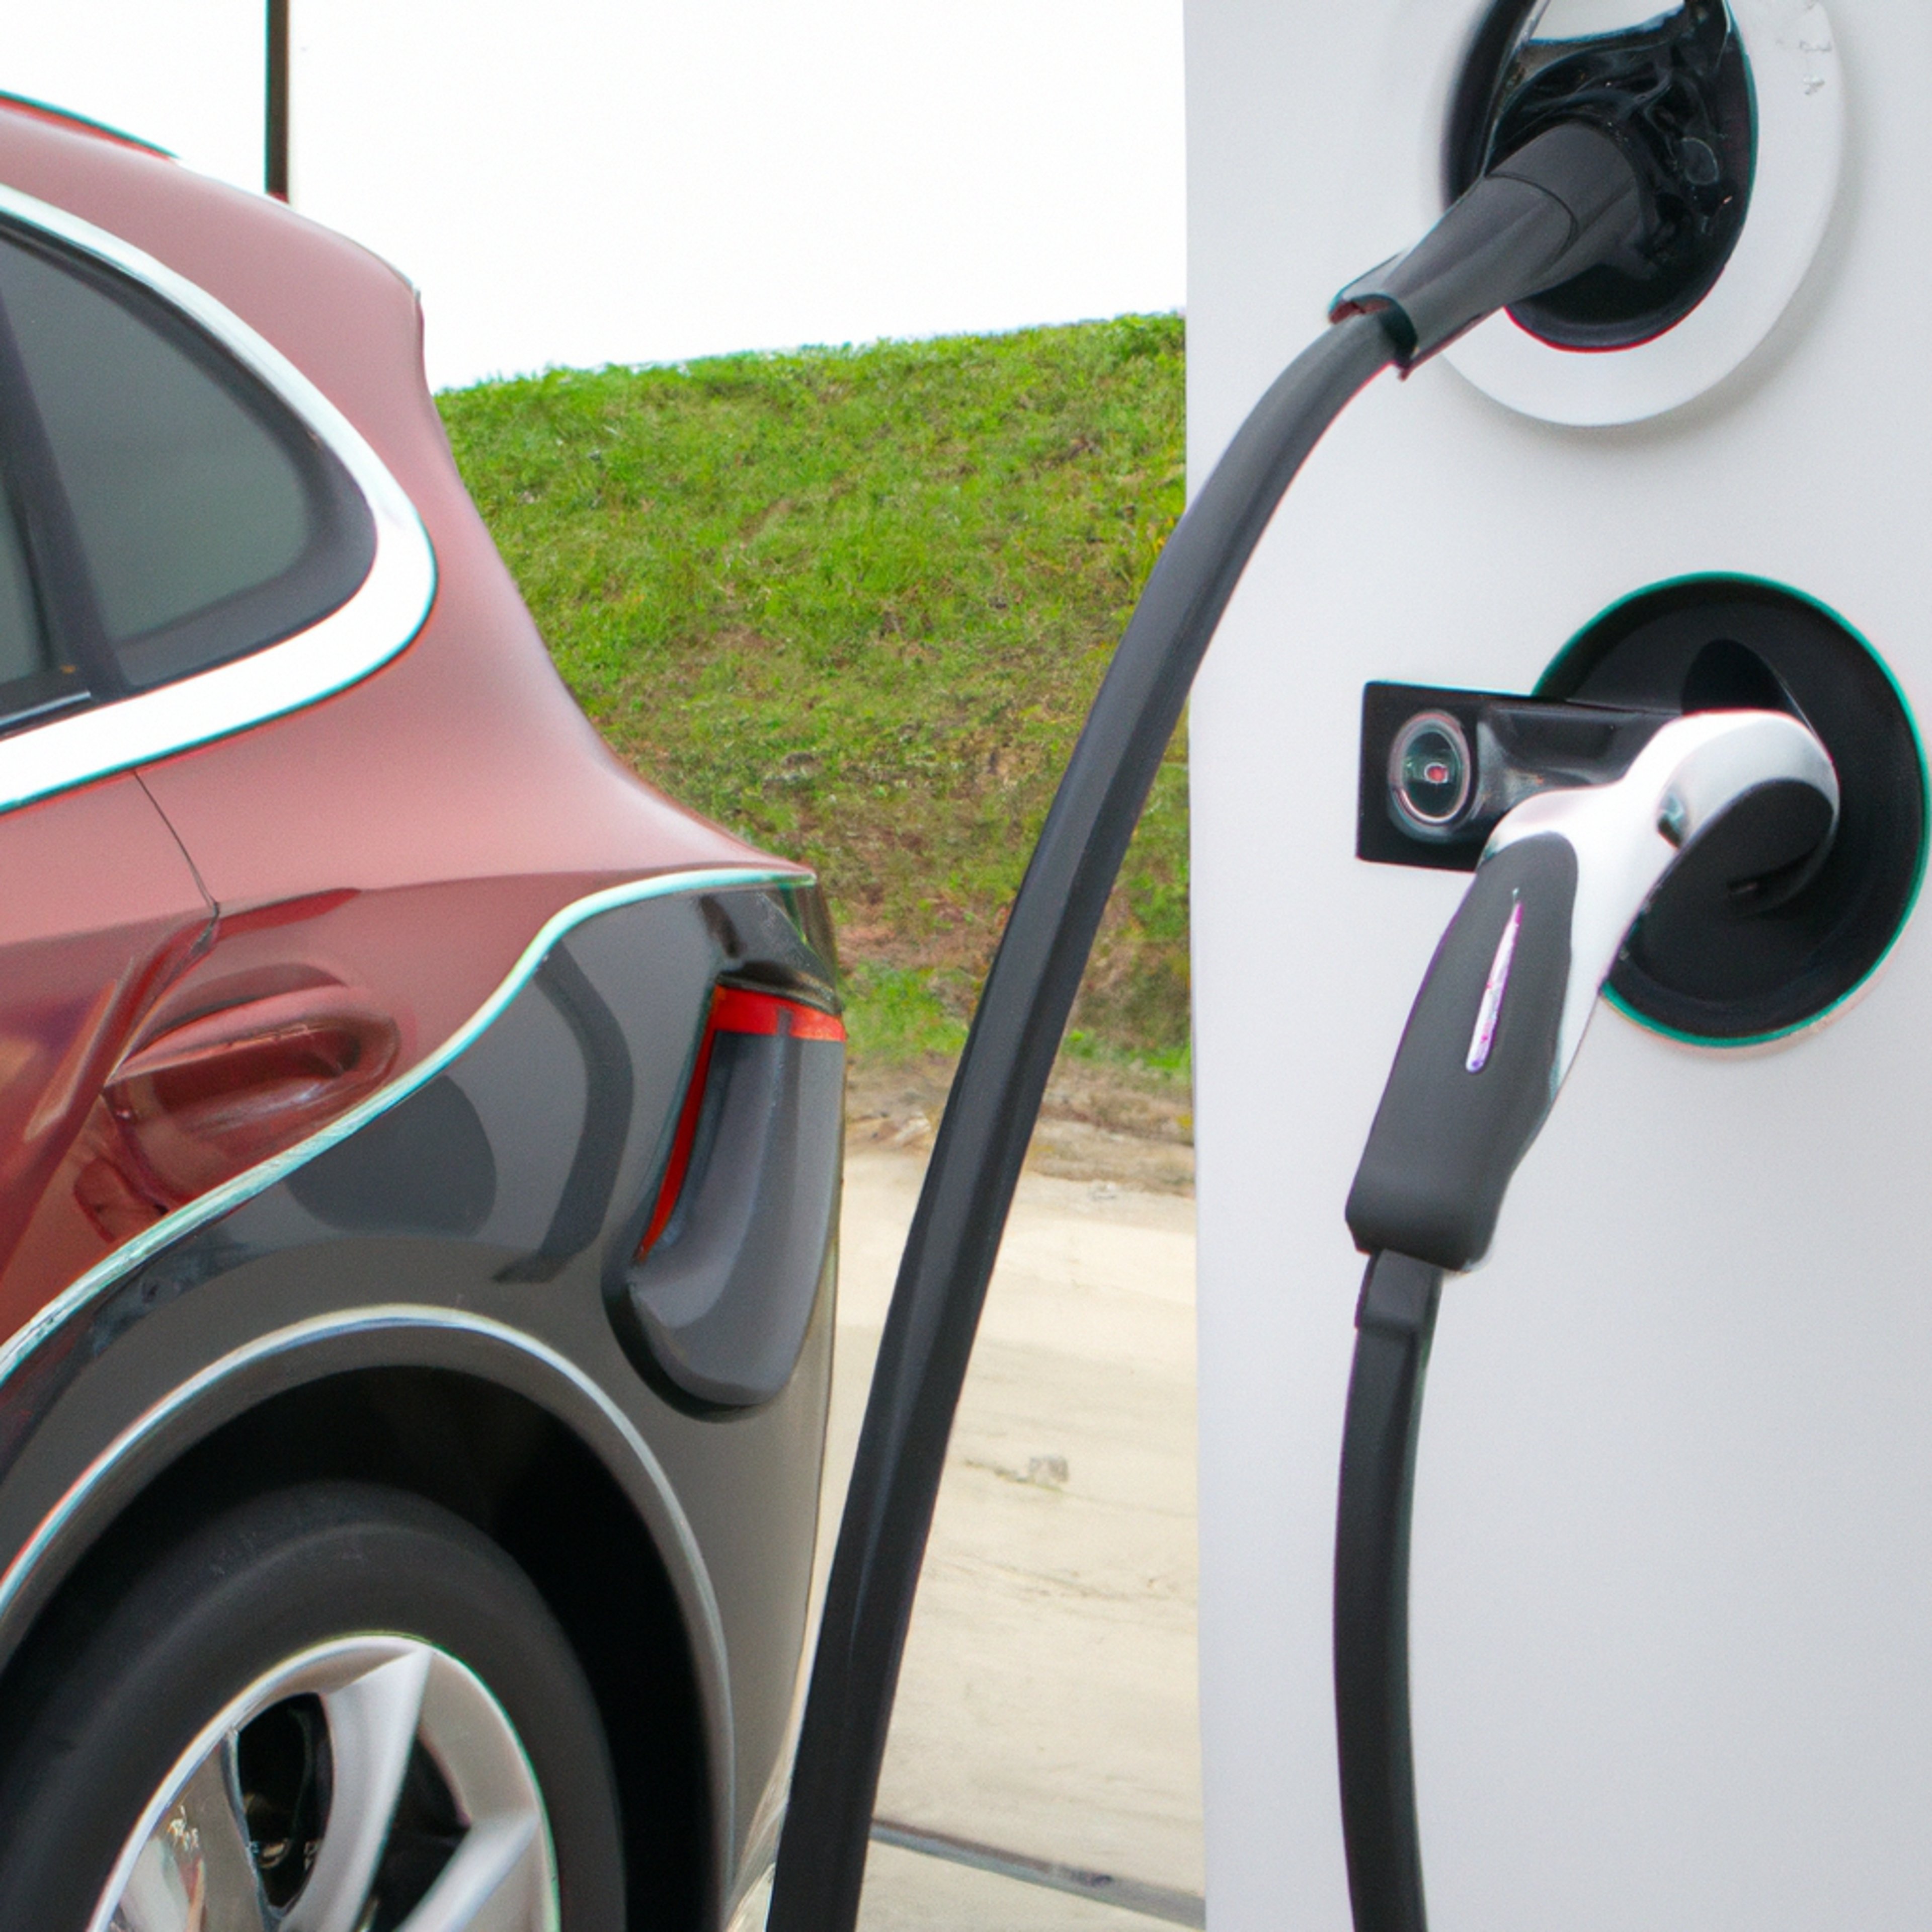 When Will Electric Cars Surpass Gas Vehicles?